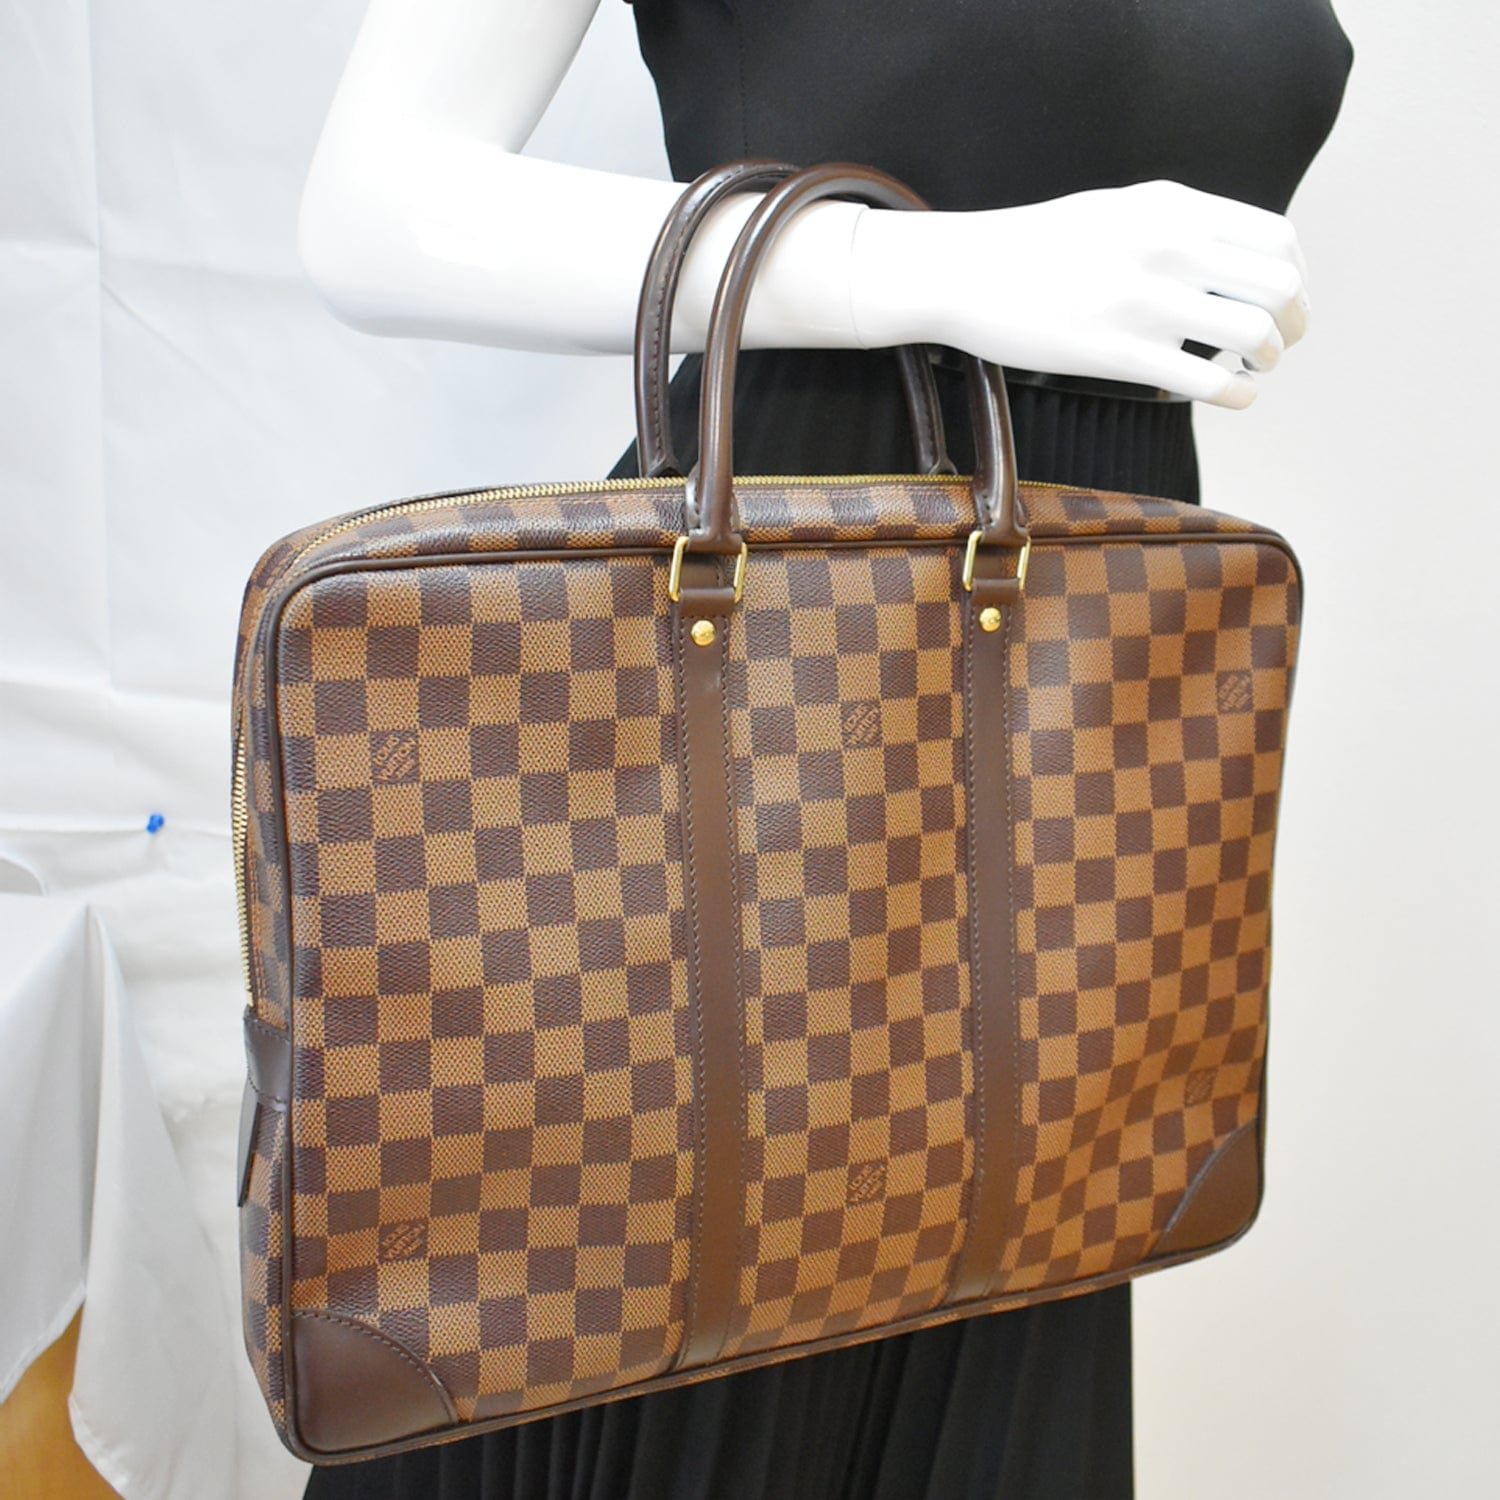 Louis Vuitton - Authenticated Pochette Voyage Small Bag - Leather Brown Plain for Men, Very Good Condition